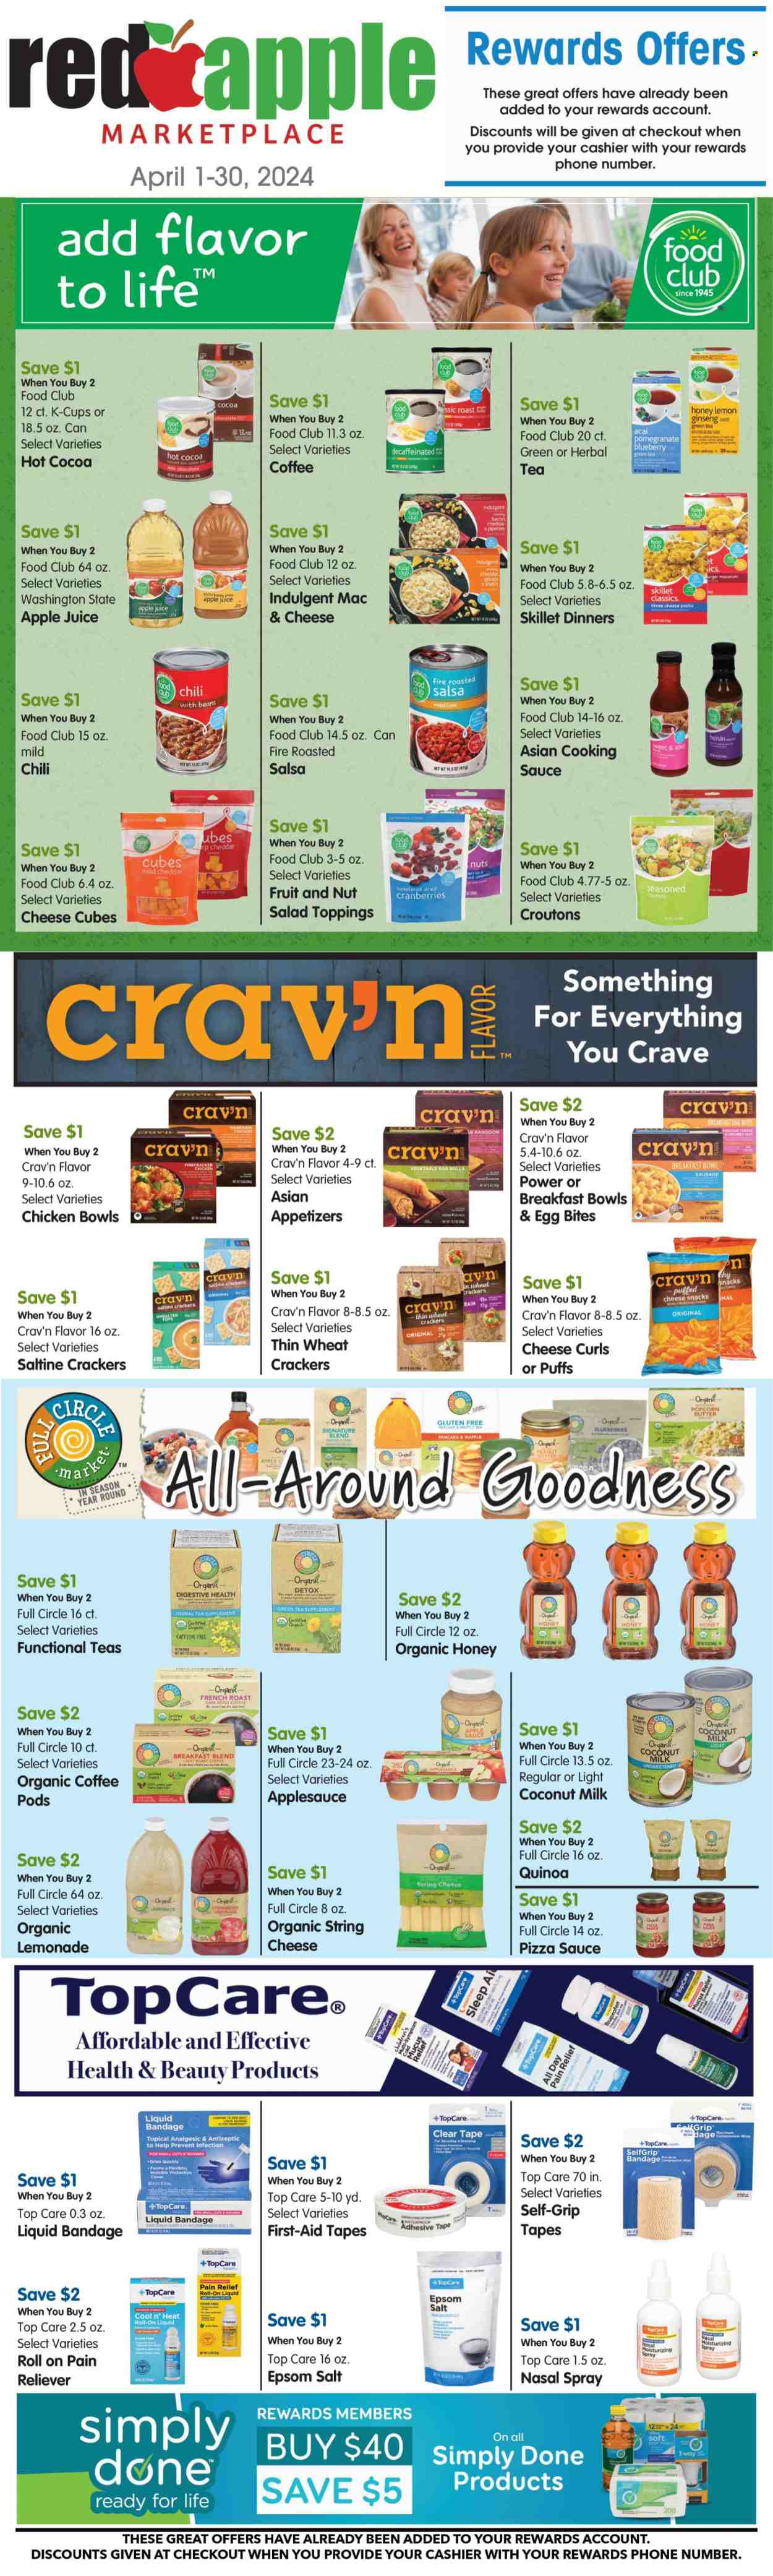 thumbnail - Red Apple Marketplace Flyer - 04/01/2024 - 04/30/2024 - Sales products - puffs, macaroni & cheese, macaroni, snack, pasta, egg rolls, breakfast bowl, ready meal, uncured ham, gouda, mild cheddar, string cheese, cheddar, plant-based milk, milk chocolate, crackers, popcorn, salty snack, croutons, topping, coconut milk, cranberries, pizza sauce, quinoa, hoisin sauce, dressing, salsa, apple sauce, dried fruit, apple juice, lemonade, juice, hot cocoa, green tea, herbal tea, tea bags, coffee pods, organic coffee, coffee capsules, K-Cups, breakfast blend, chicken, Fairy. Page 1.